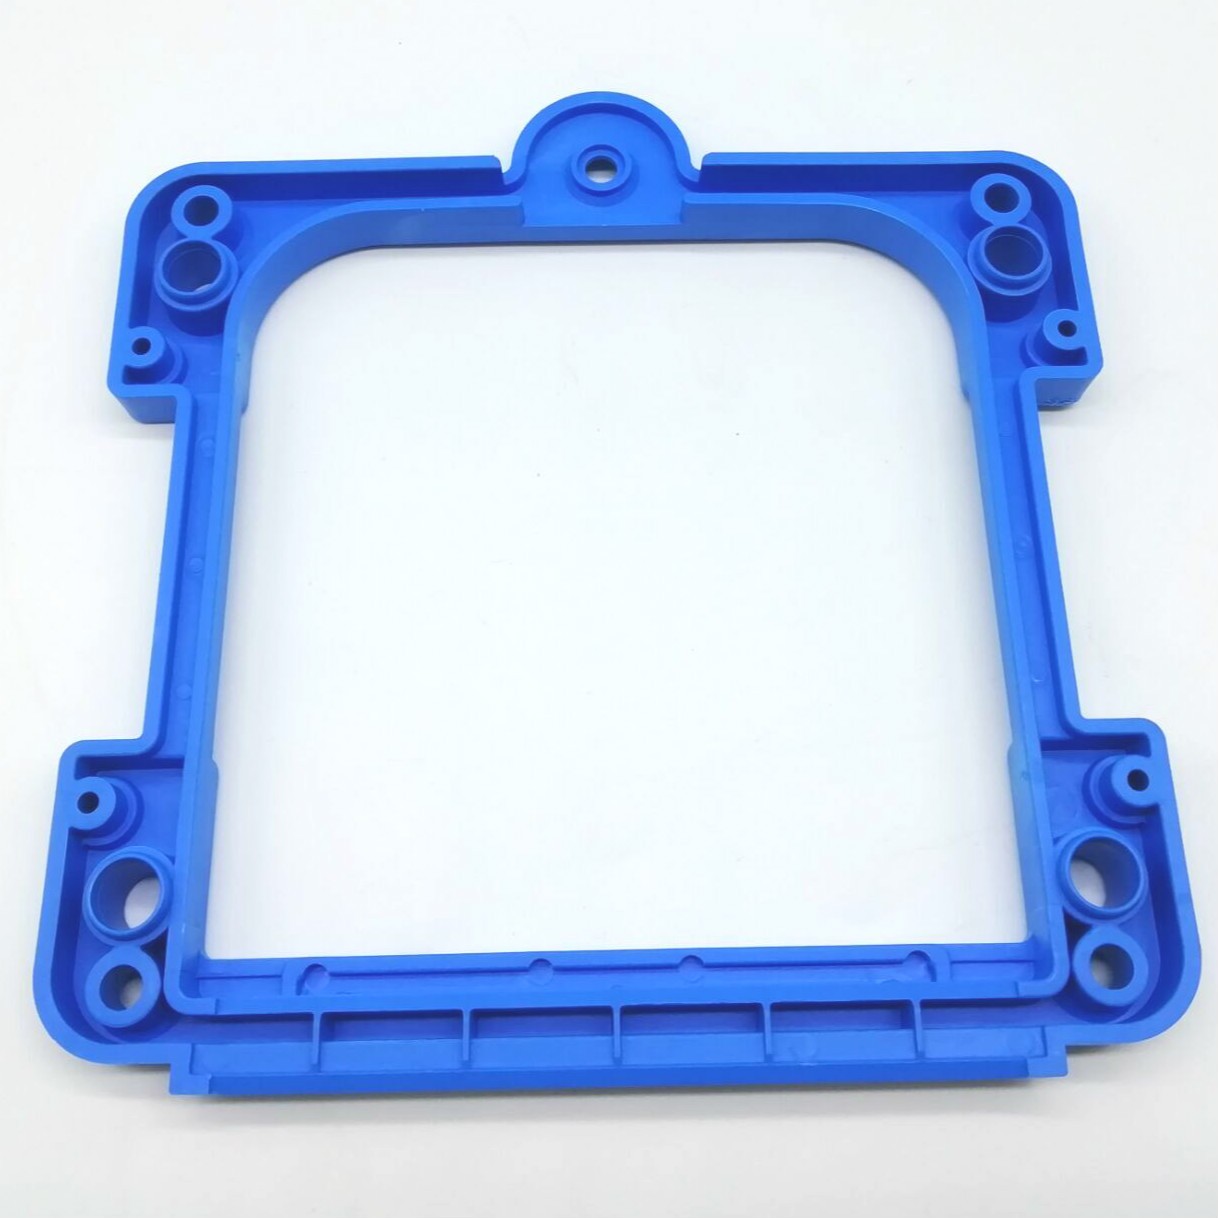 Plastic toy mould and production